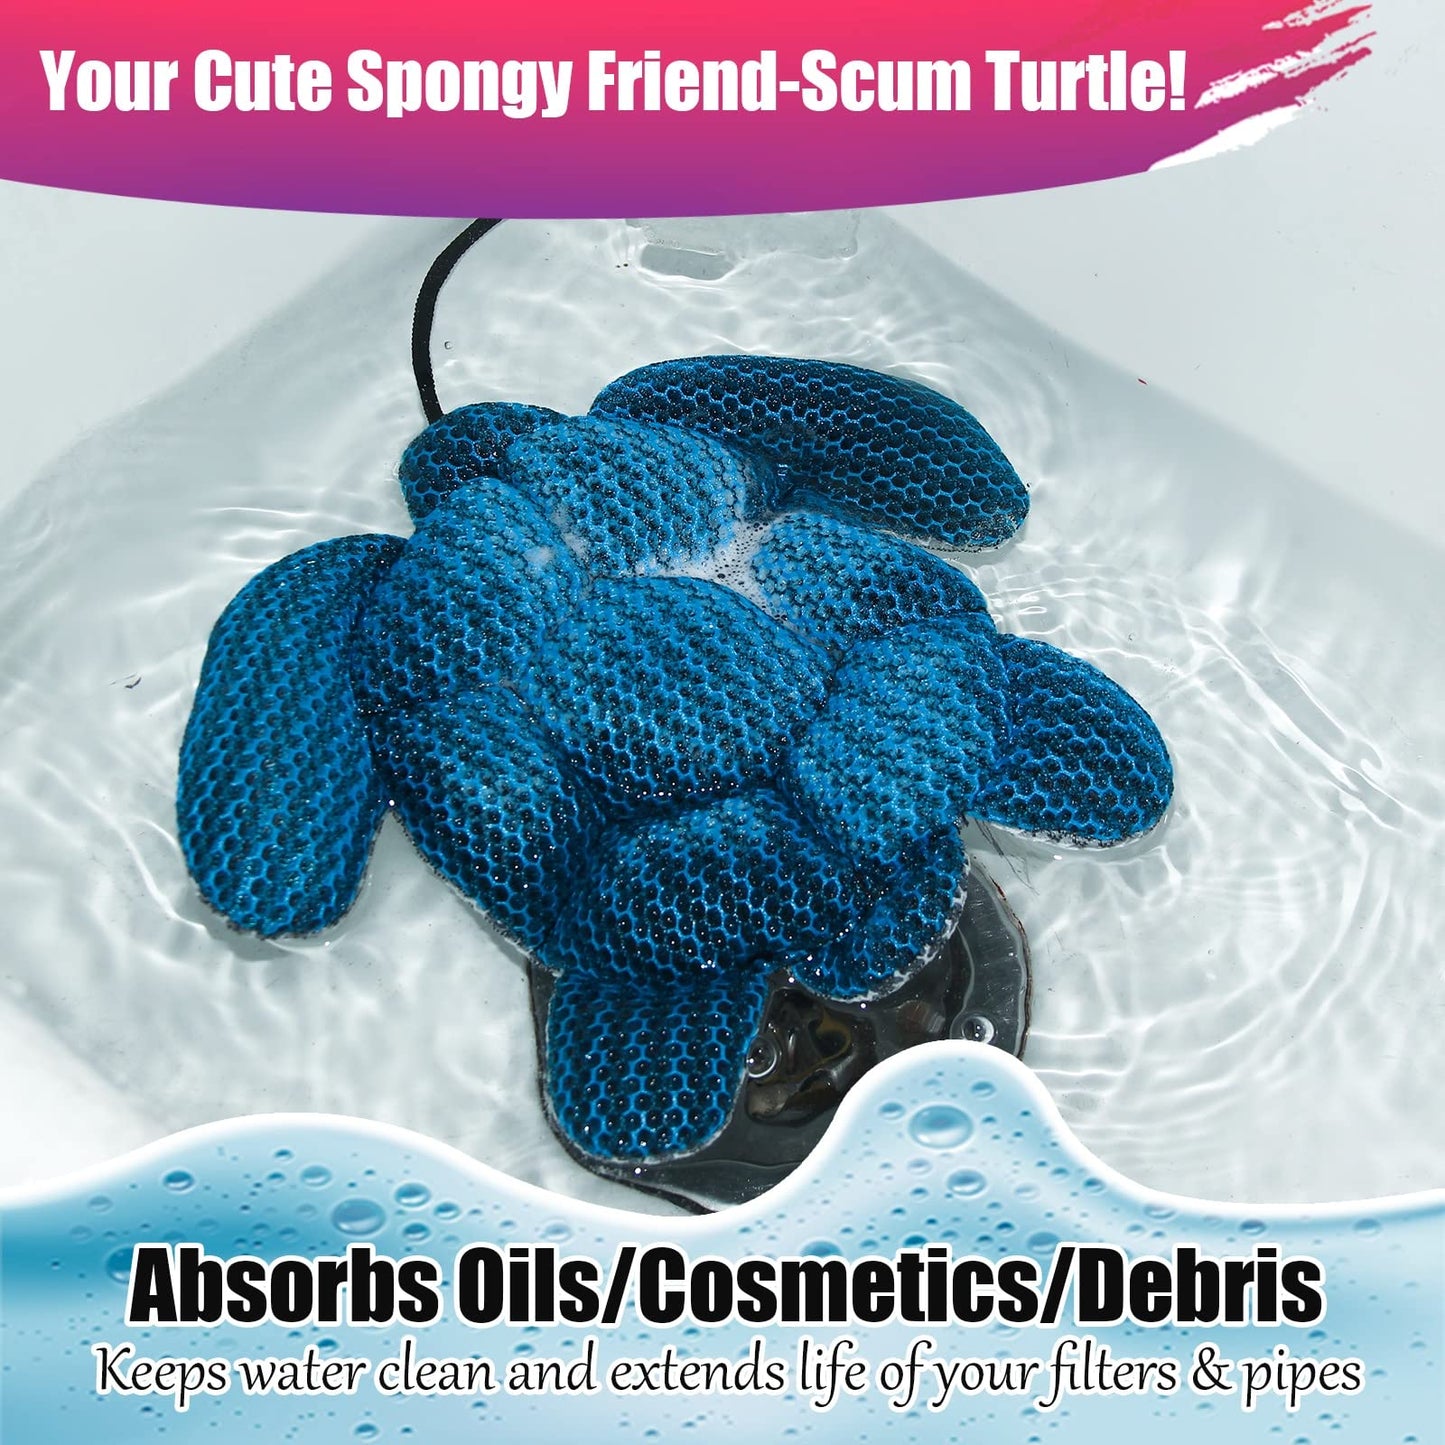 ANSLCA Hot Tub Scum Absorber, Scum Turtle Hot Tub Cleaner Hot Tub Sponges to Soak up Oils- Must Have Hot Tub Accessories for Adults Hot Tub Scum Sponge- Keeps Your Hot Tub Water Clean and Clear